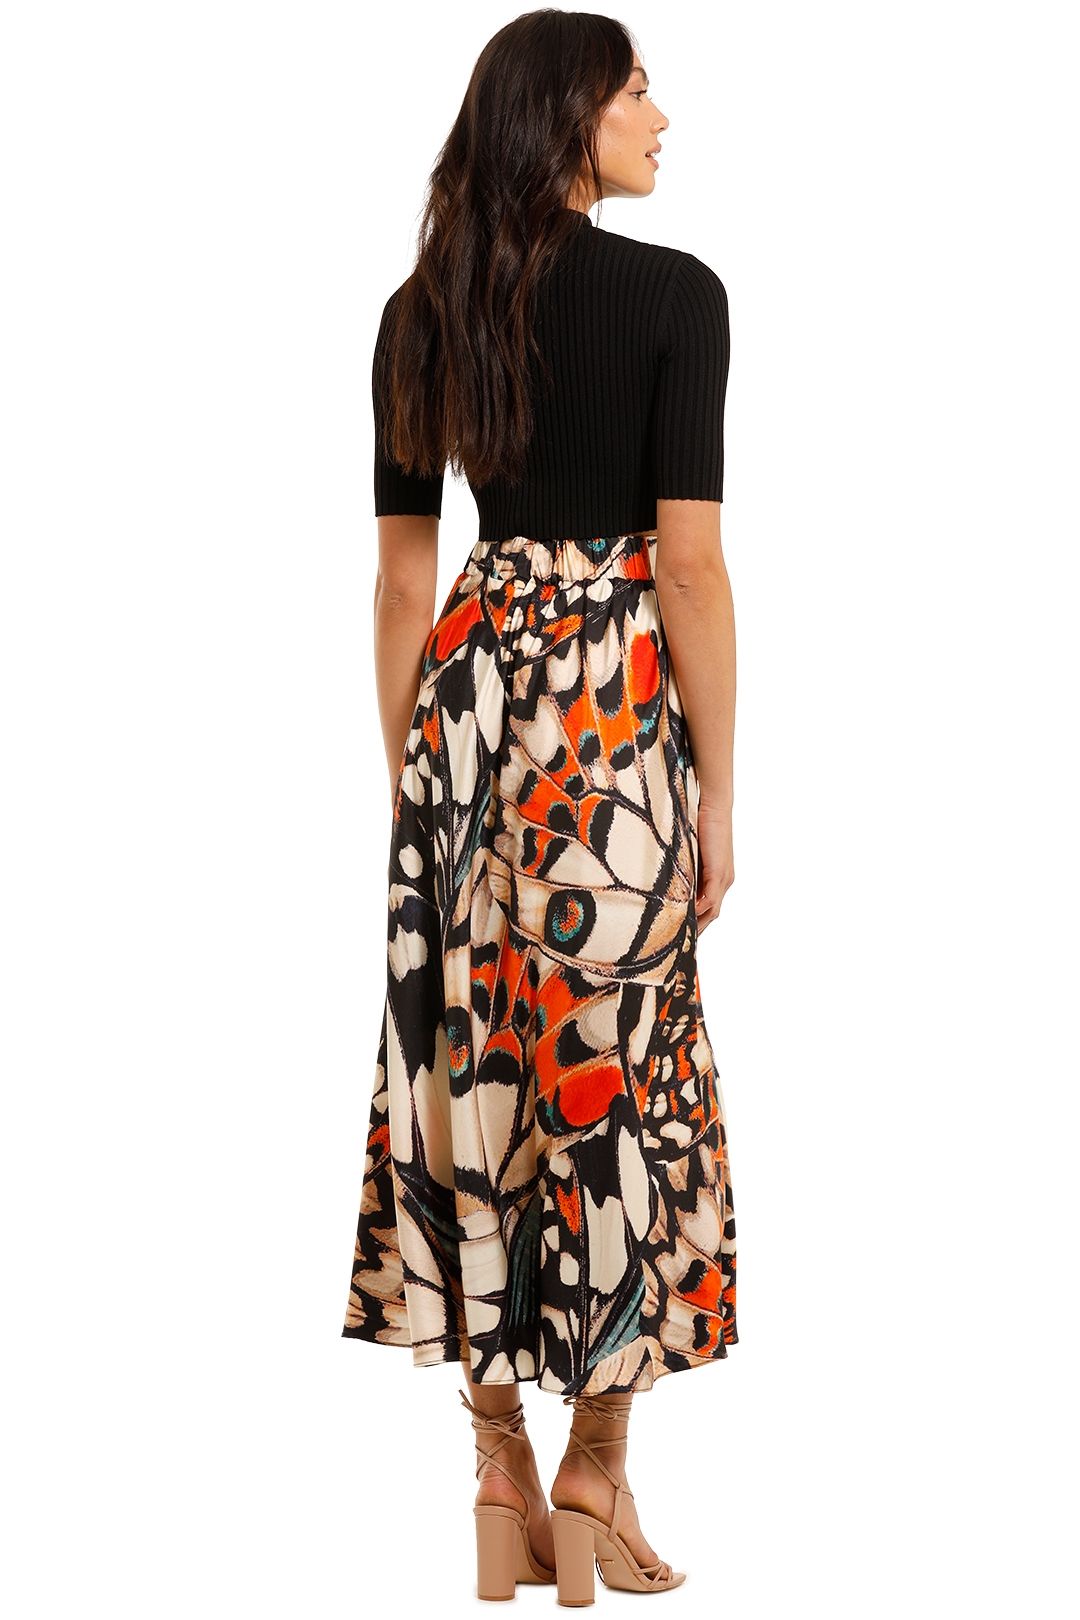 Ginger and Smart All The Love Skirt Abstract Print